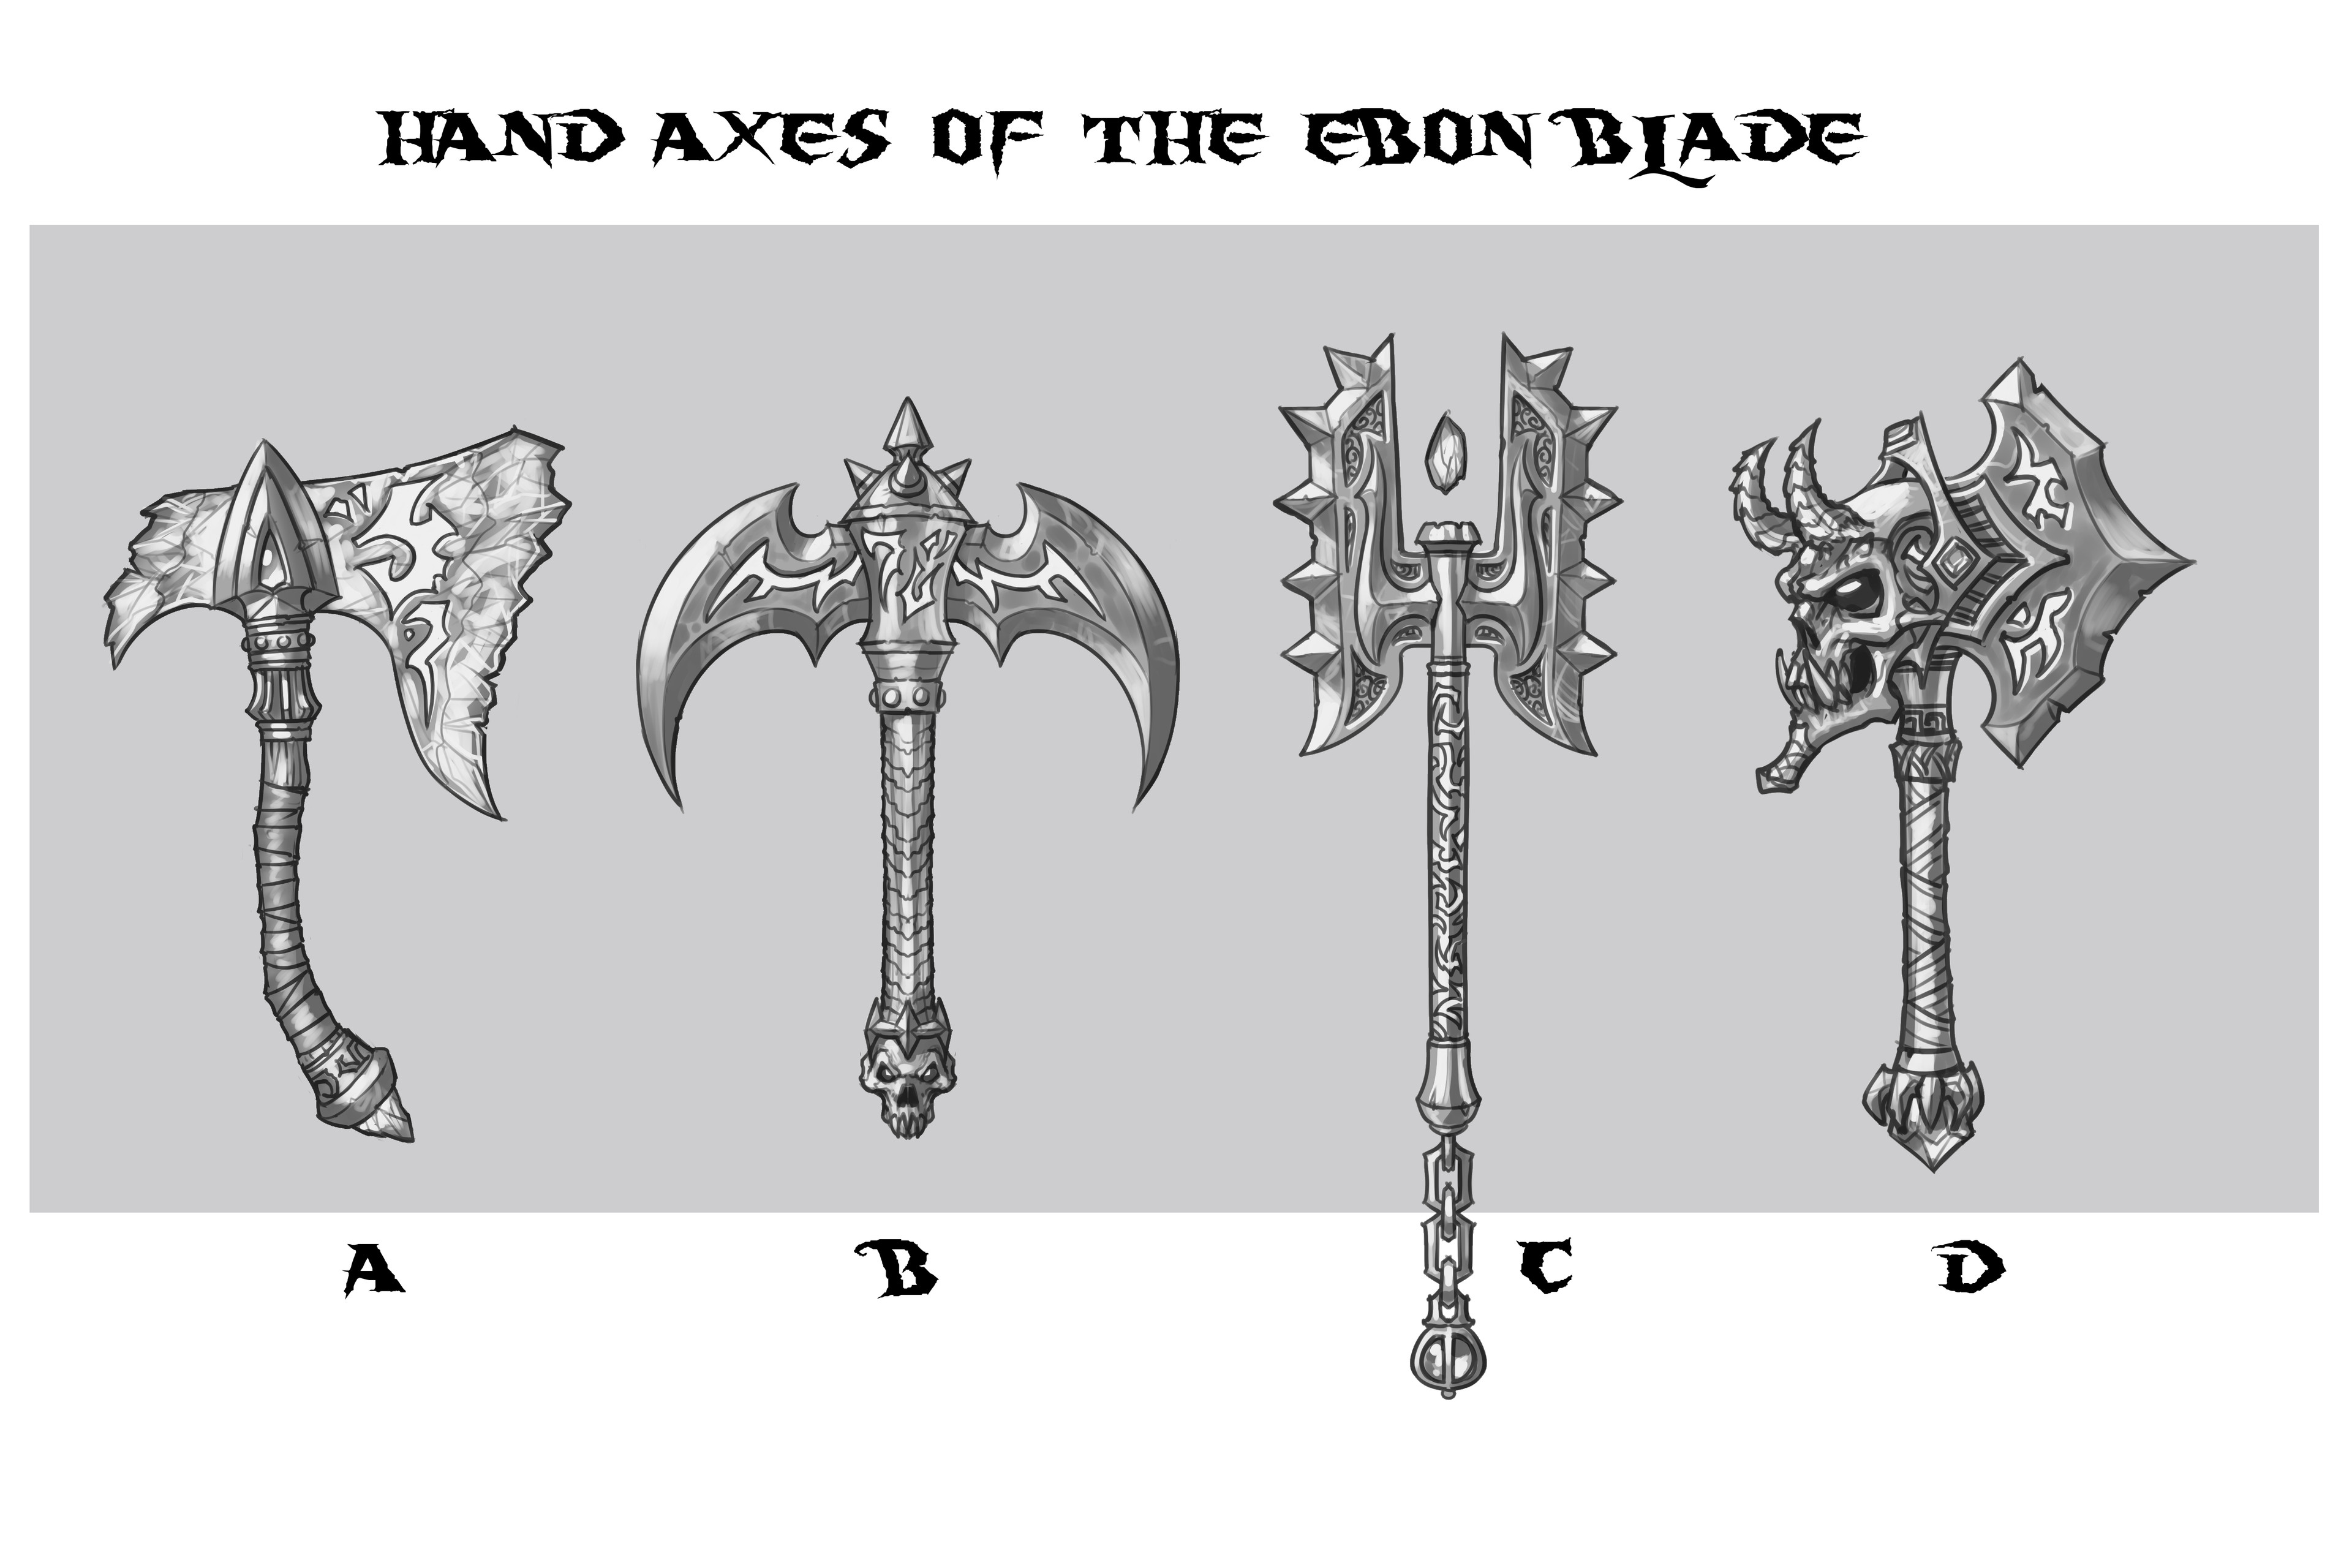 One-handed axe concepts